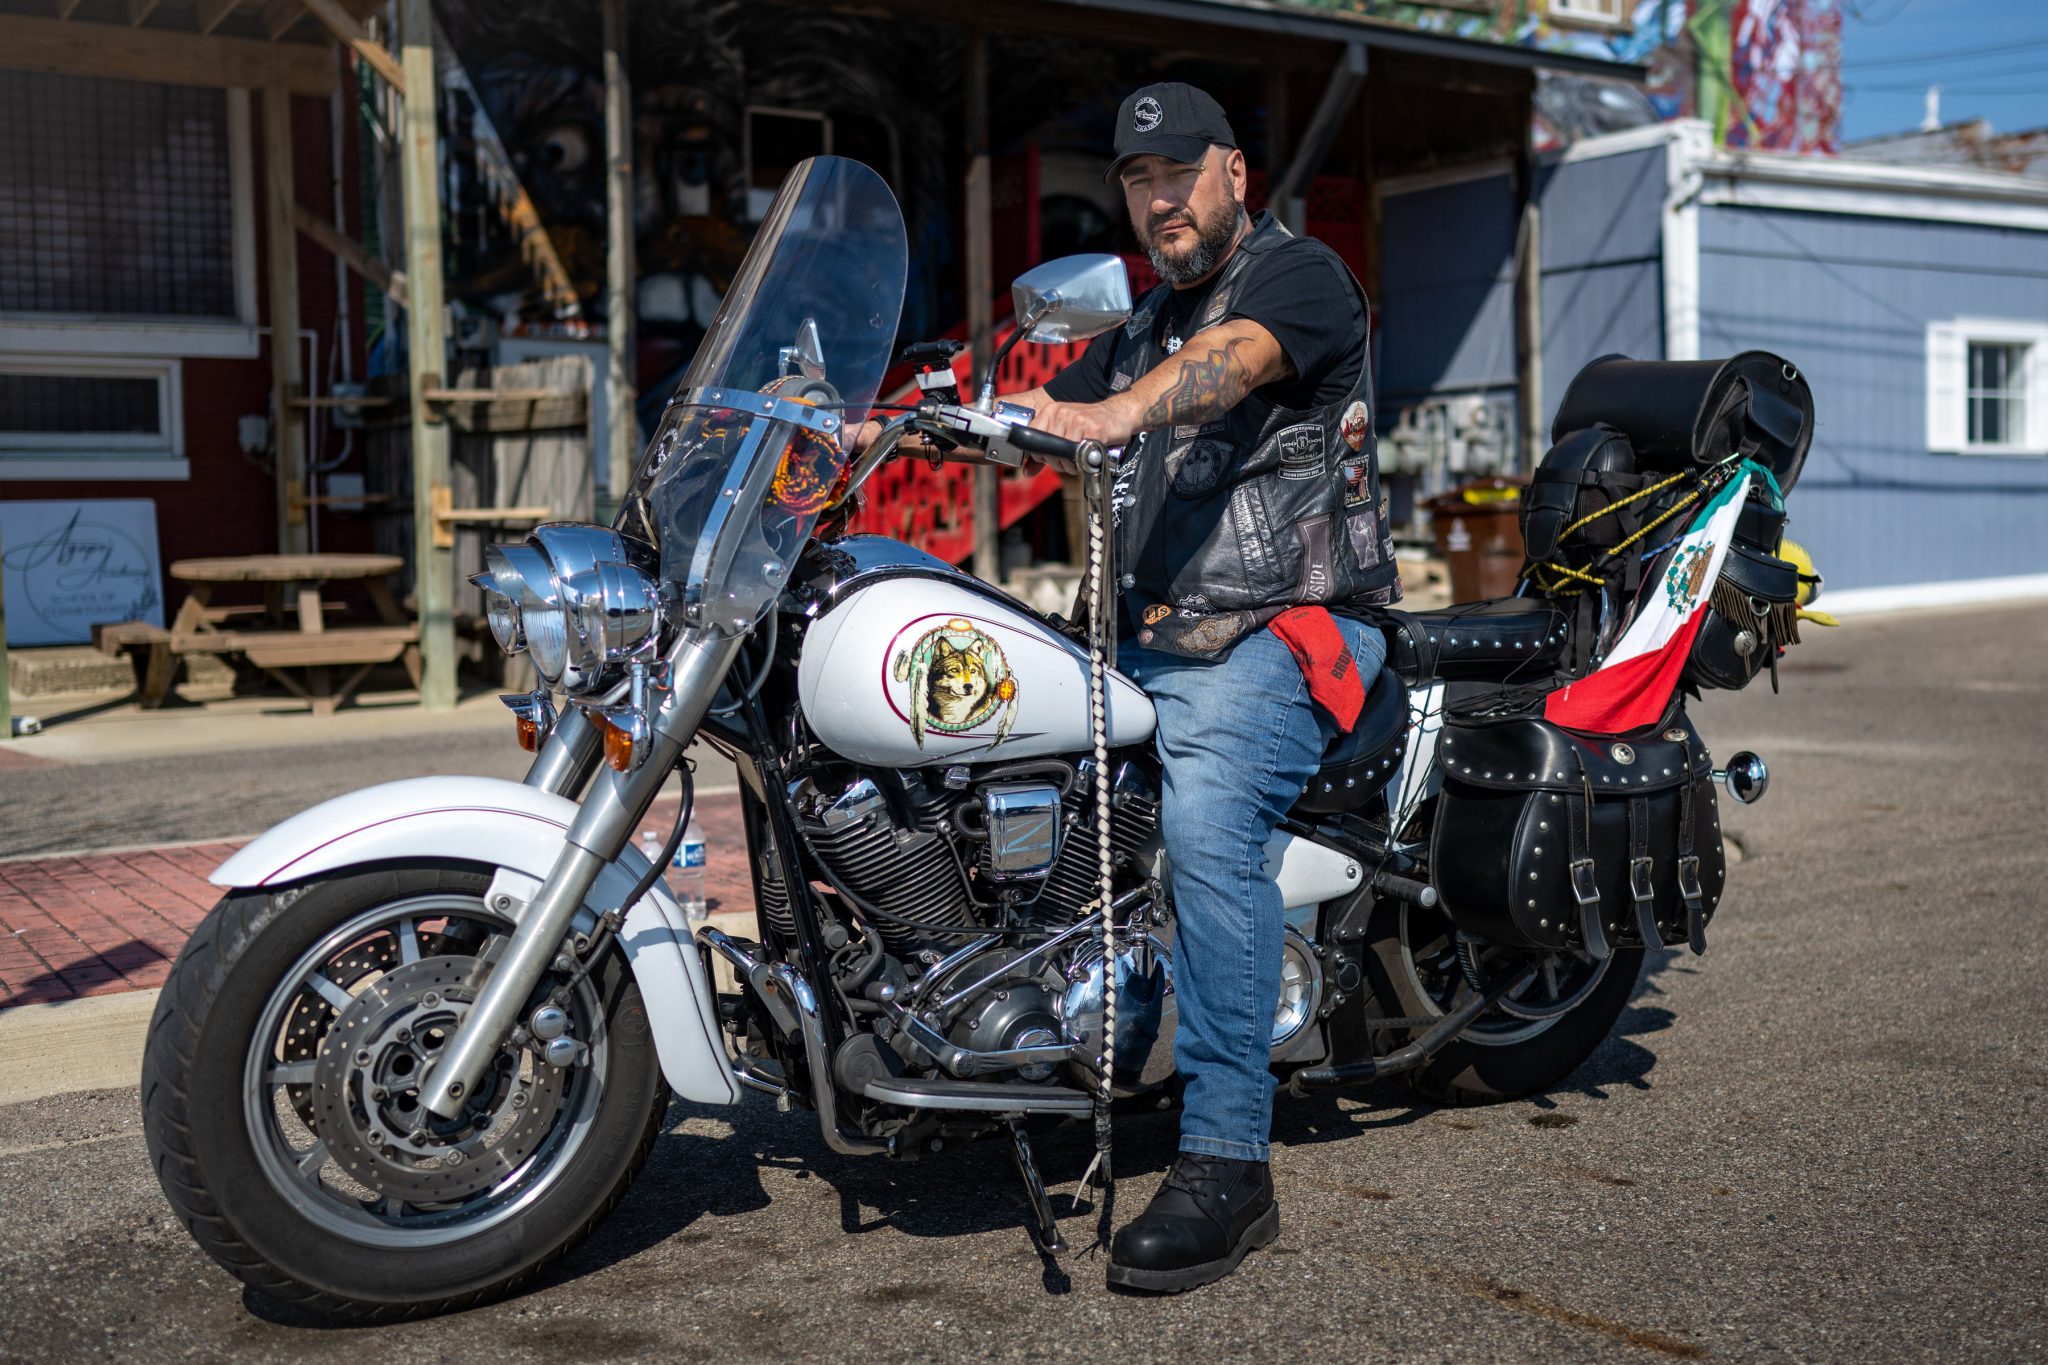 Biker and Michigan resident Johnny Van Patten shared his personal journey from the one-percenter lifestyle to becoming ‘Christ-centered in recovery,’ as a member of the Broken Chains motorcycle club.